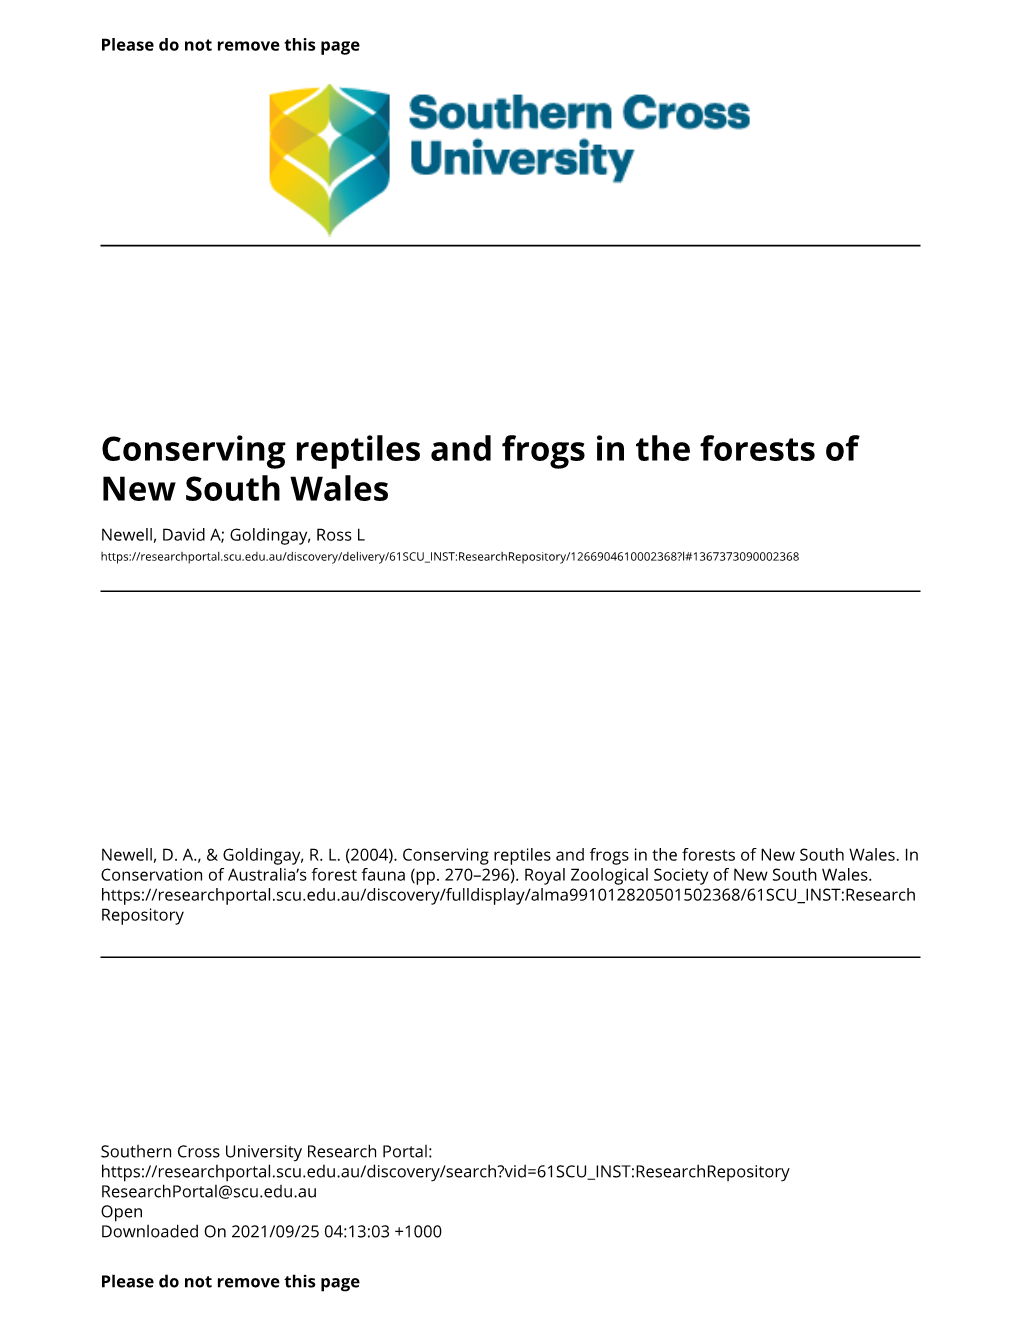 Conserving Reptiles and Frogs in the Forests of New South Wales